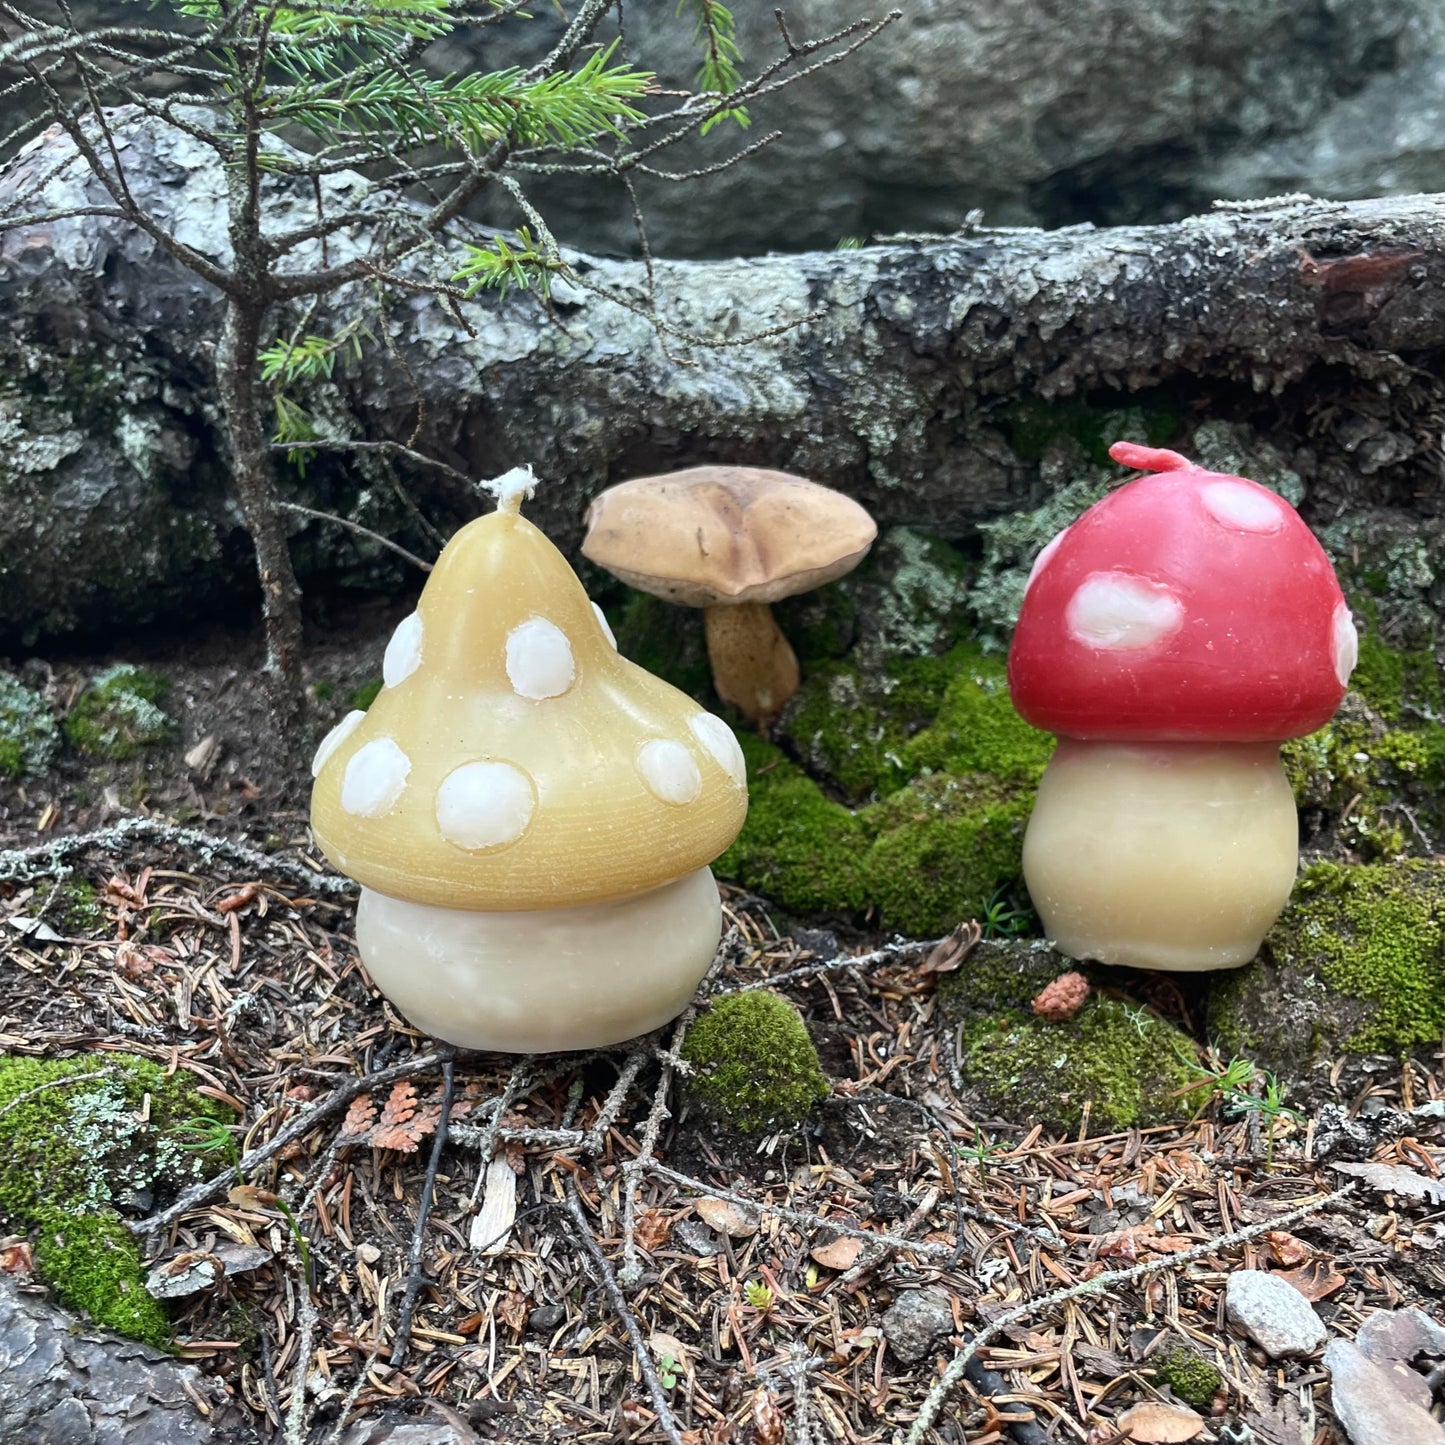 Instant Mushroom Candle Collection - Toadstool Candles, Pure 100% Beeswax - 4 Candles // Woodland, Mushroom, Beeswax, Candle, Mushroom Candle